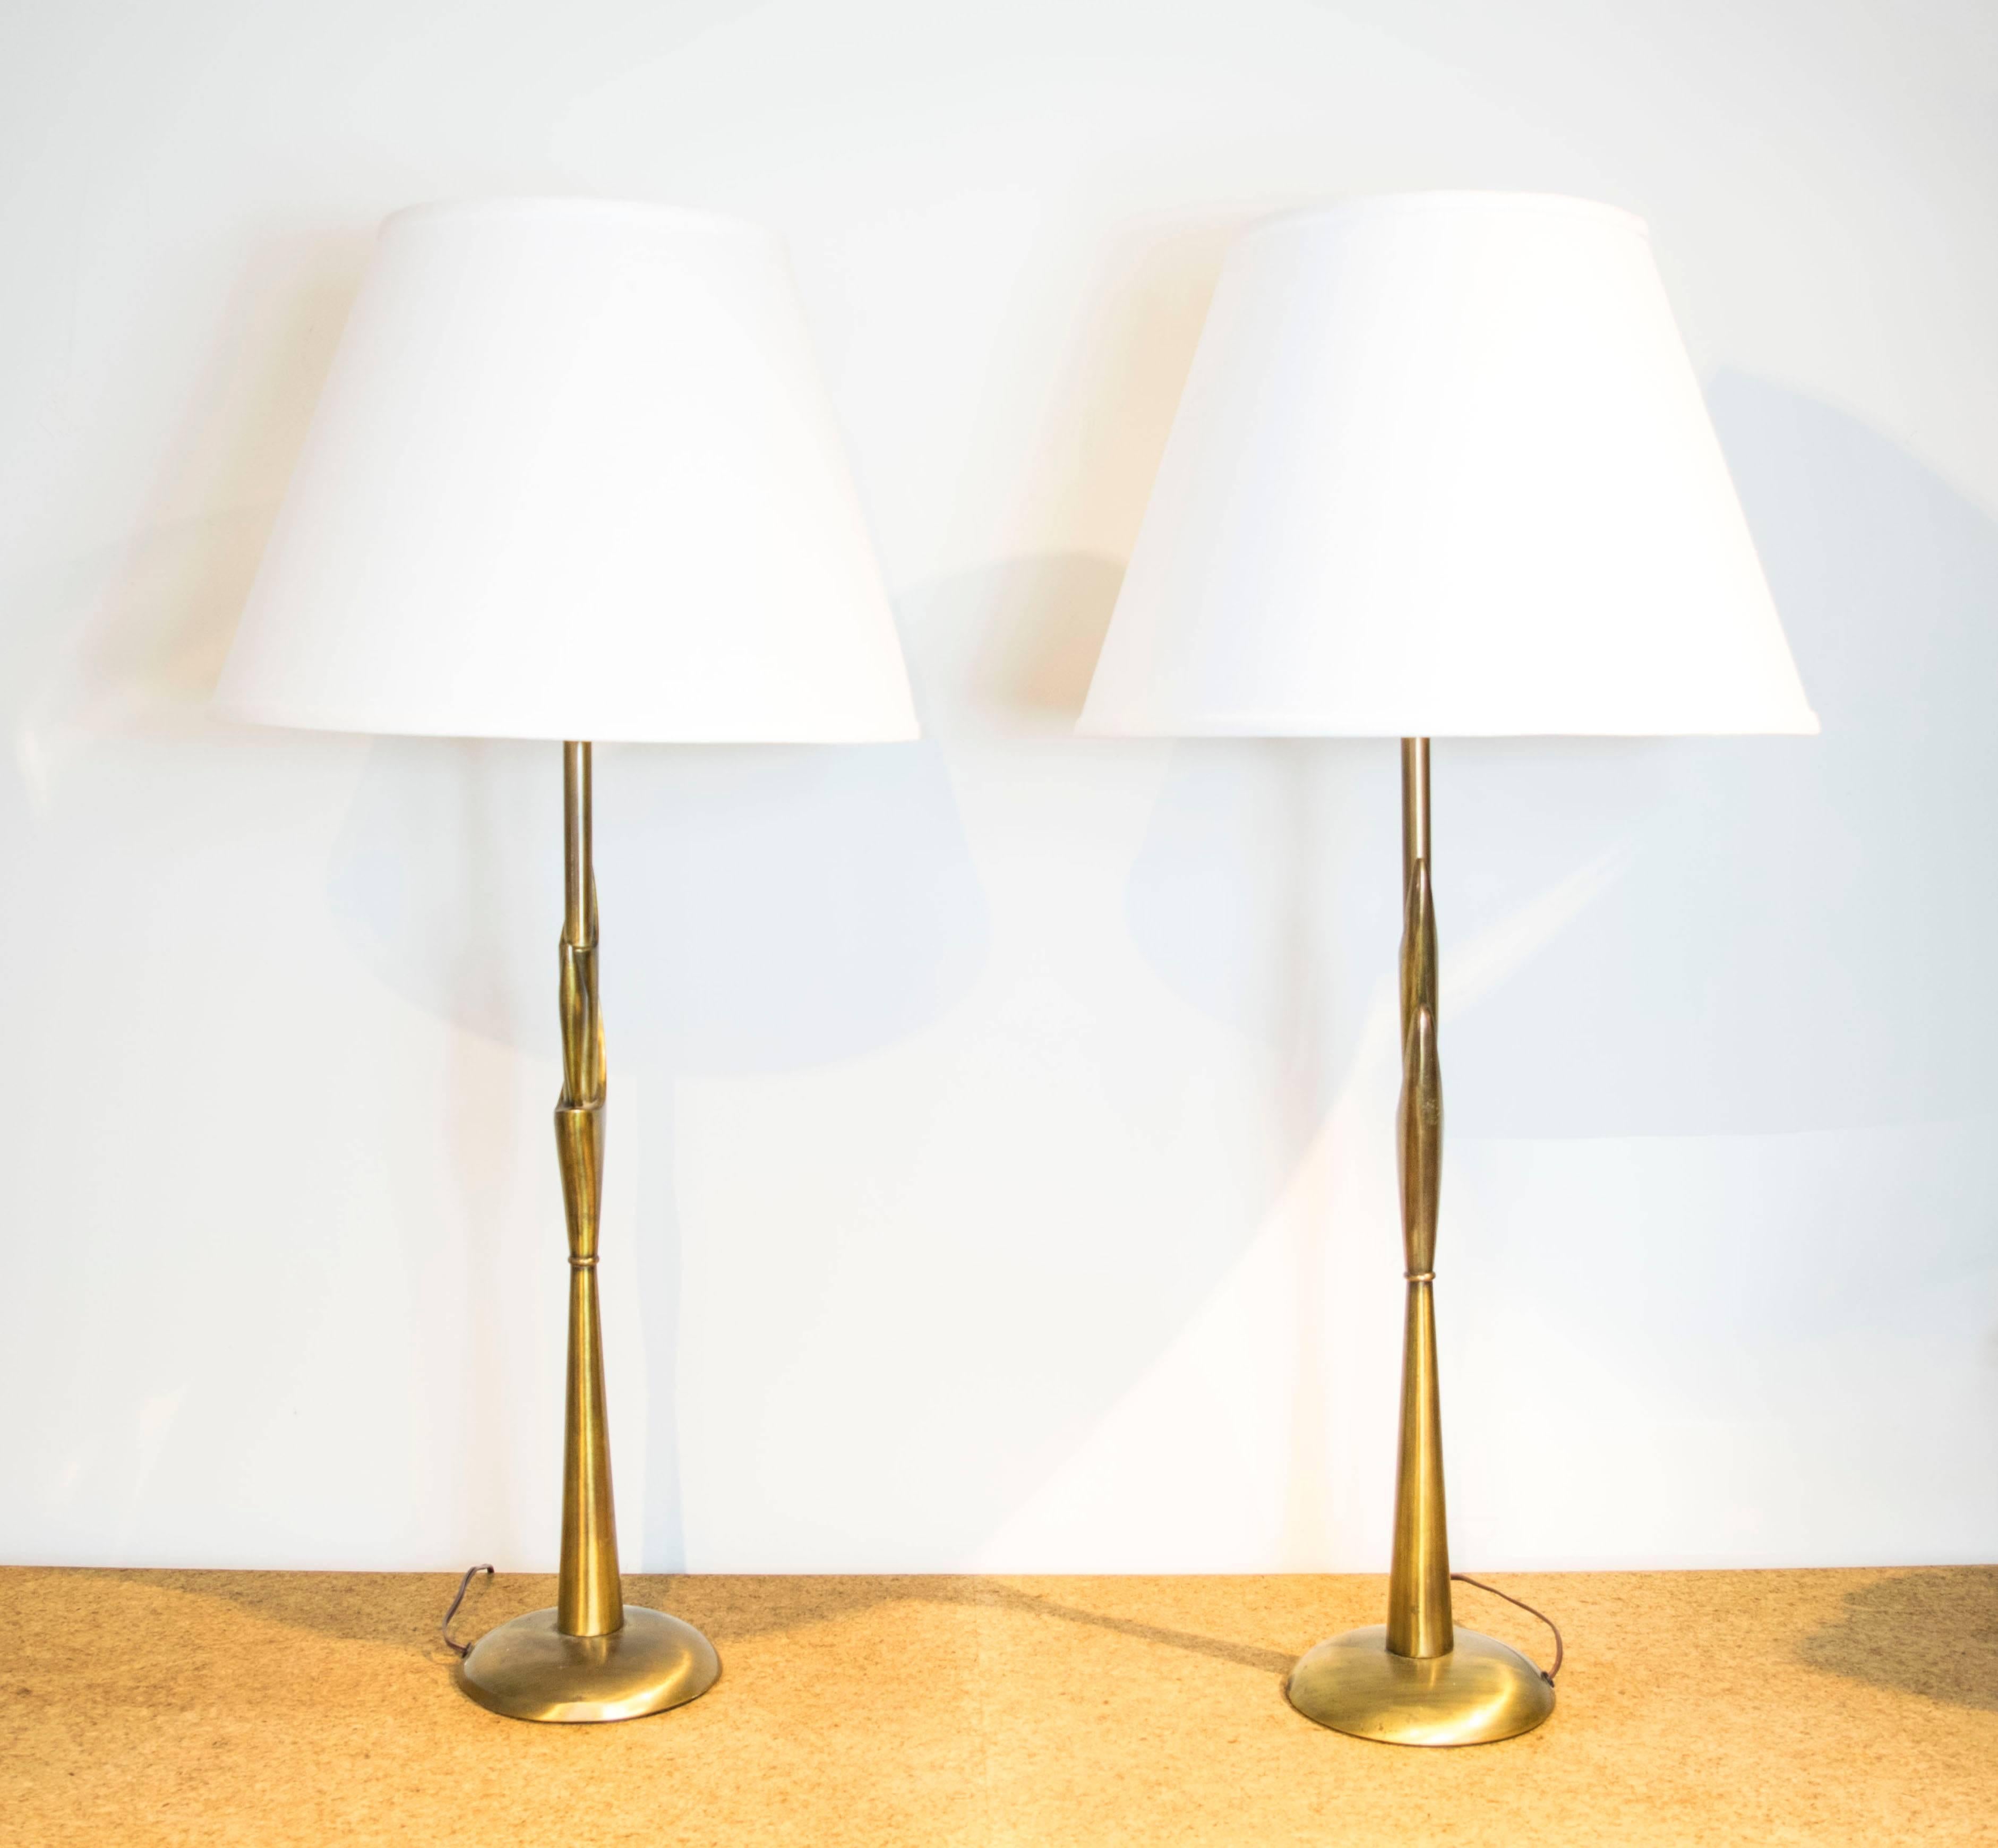 Extra tall table lamps by Rembrandt with an antique brass finish.